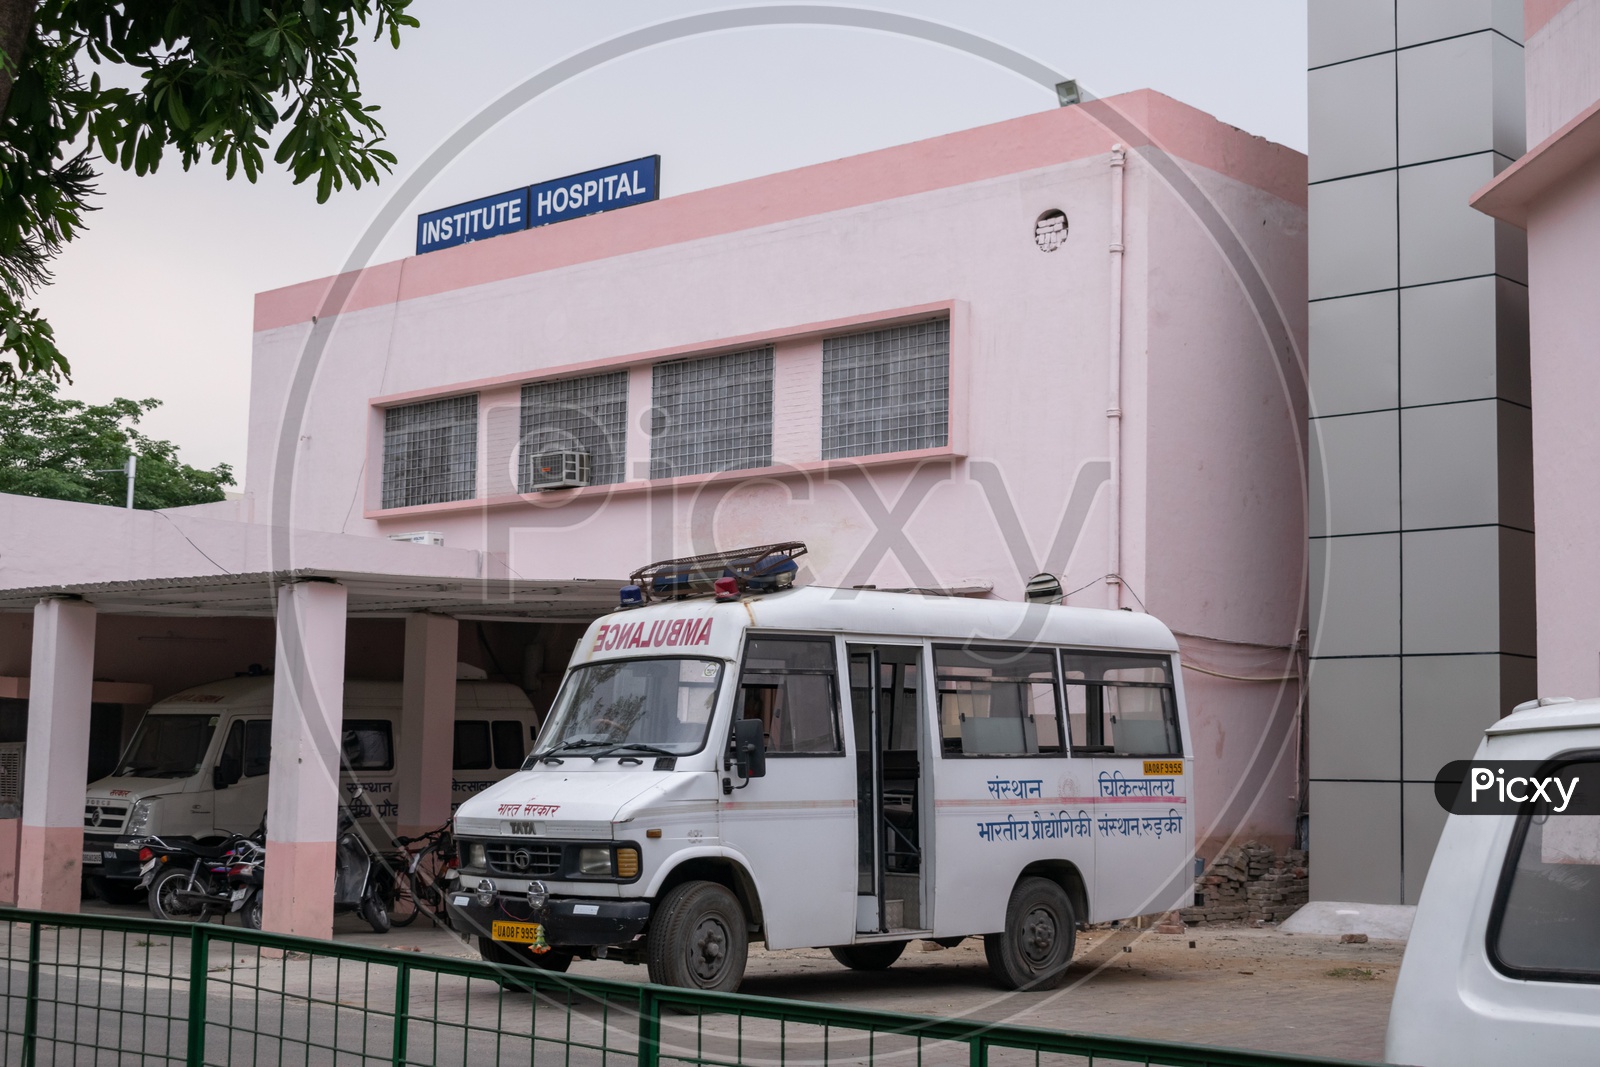 Ambulance and Institute Hospital, Indian Institute of Technology Roorkee (IIT Roorkee)